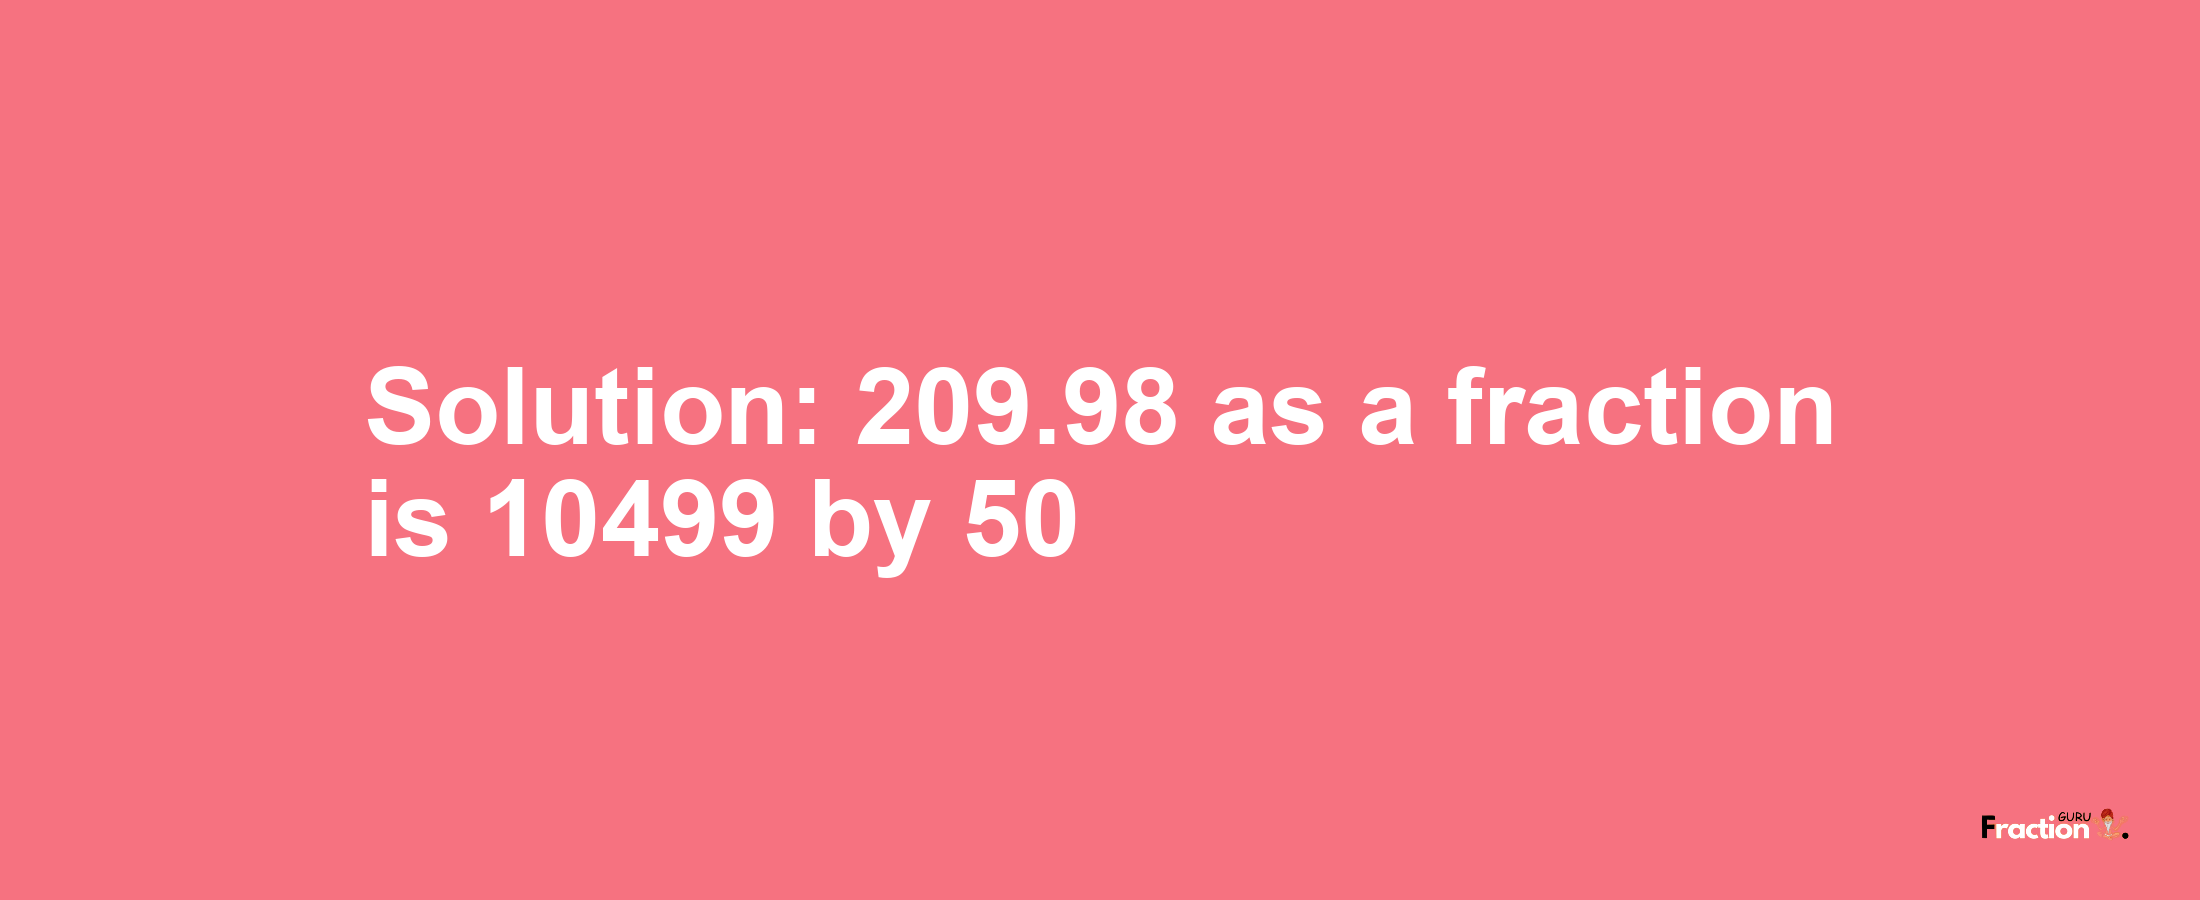 Solution:209.98 as a fraction is 10499/50